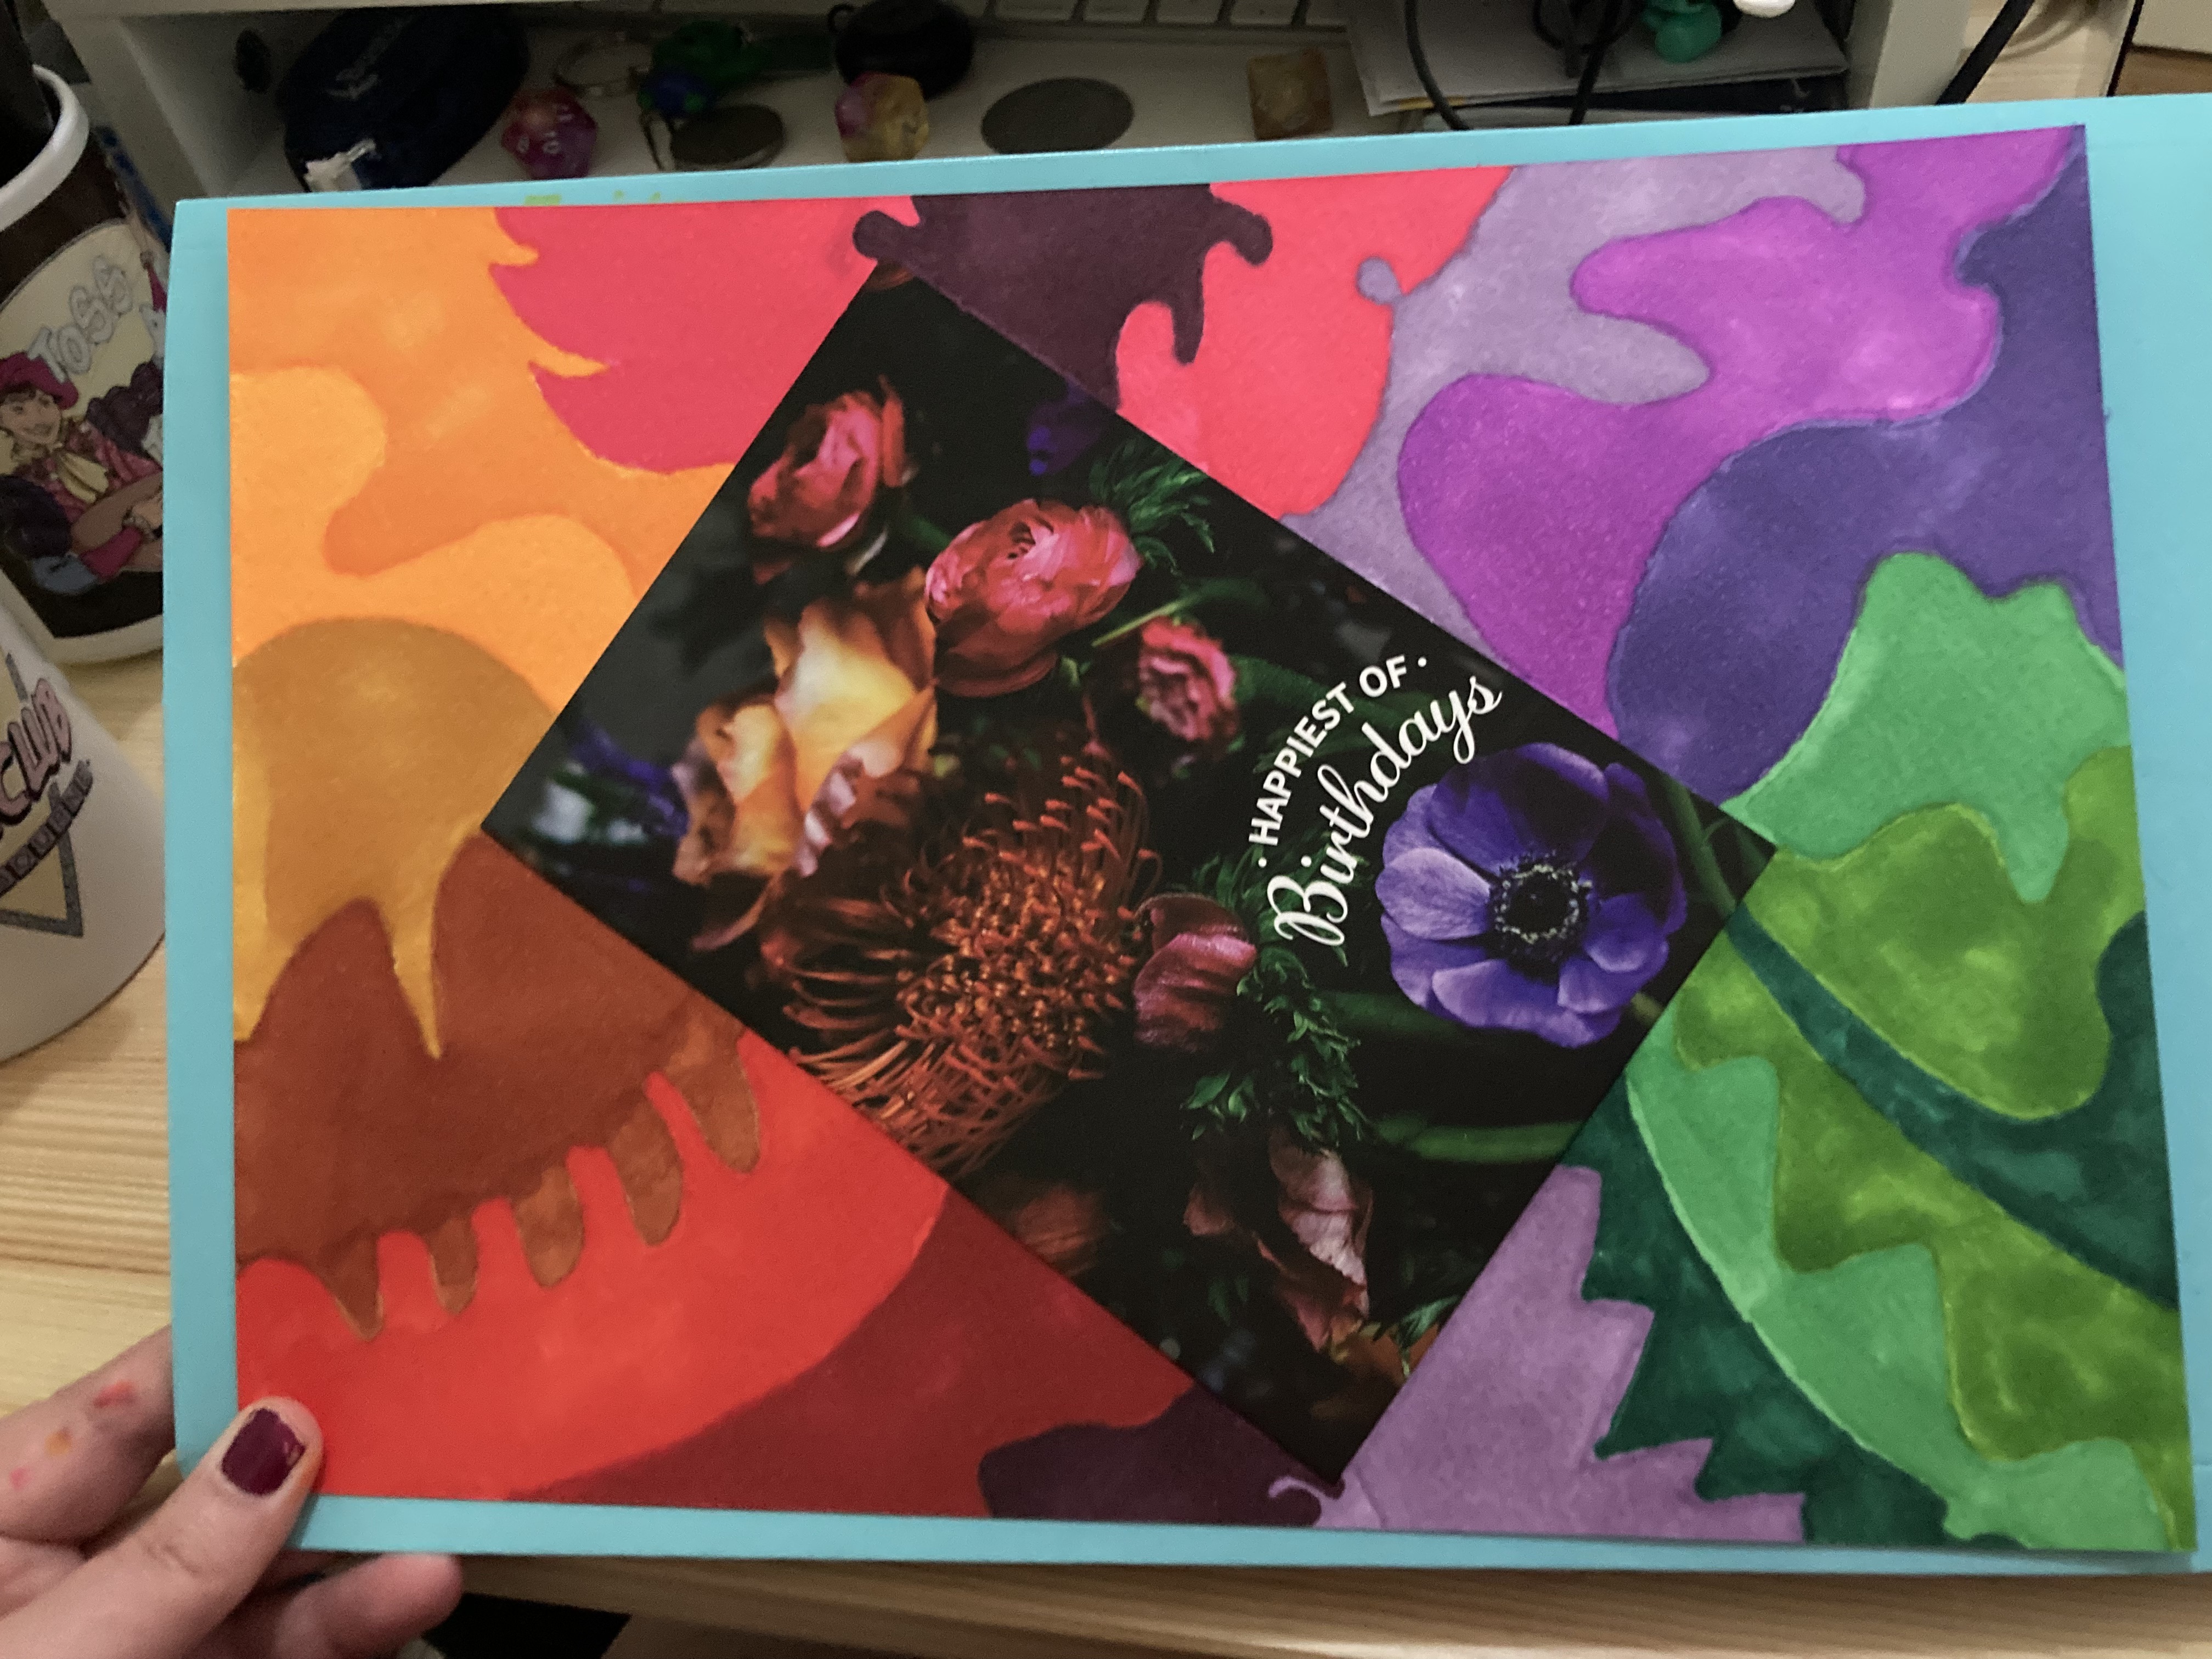 A floral birthday card is stuck on the paper at an angle and markers have been used to make it look like the colours of the card are flowing out onto the page.